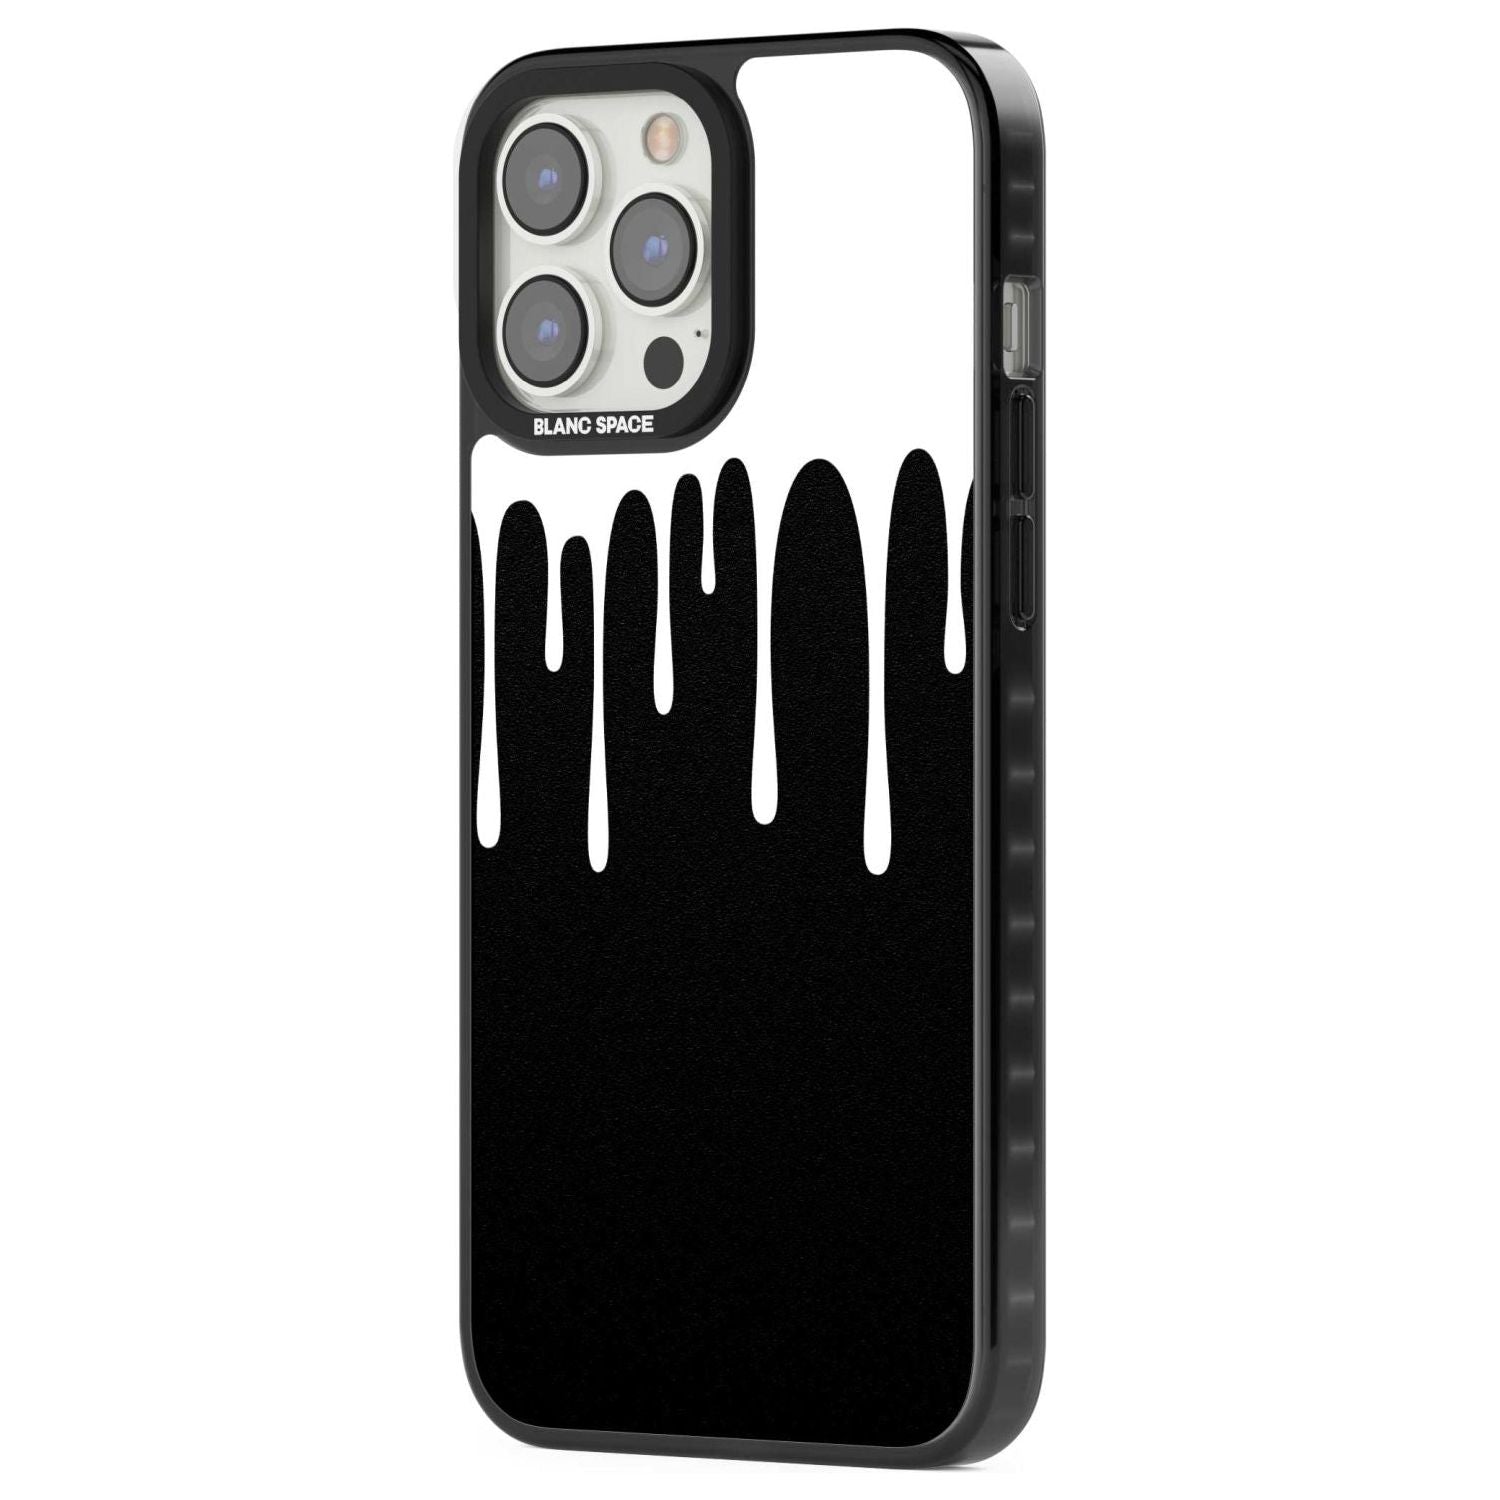 Melted Effect: White & Black Phone Case iPhone 15 Pro Max / Black Impact Case,iPhone 15 Plus / Black Impact Case,iPhone 15 Pro / Black Impact Case,iPhone 15 / Black Impact Case,iPhone 15 Pro Max / Impact Case,iPhone 15 Plus / Impact Case,iPhone 15 Pro / Impact Case,iPhone 15 / Impact Case,iPhone 15 Pro Max / Magsafe Black Impact Case,iPhone 15 Plus / Magsafe Black Impact Case,iPhone 15 Pro / Magsafe Black Impact Case,iPhone 15 / Magsafe Black Impact Case,iPhone 14 Pro Max / Black Impact Case,iPhone 14 Plus 